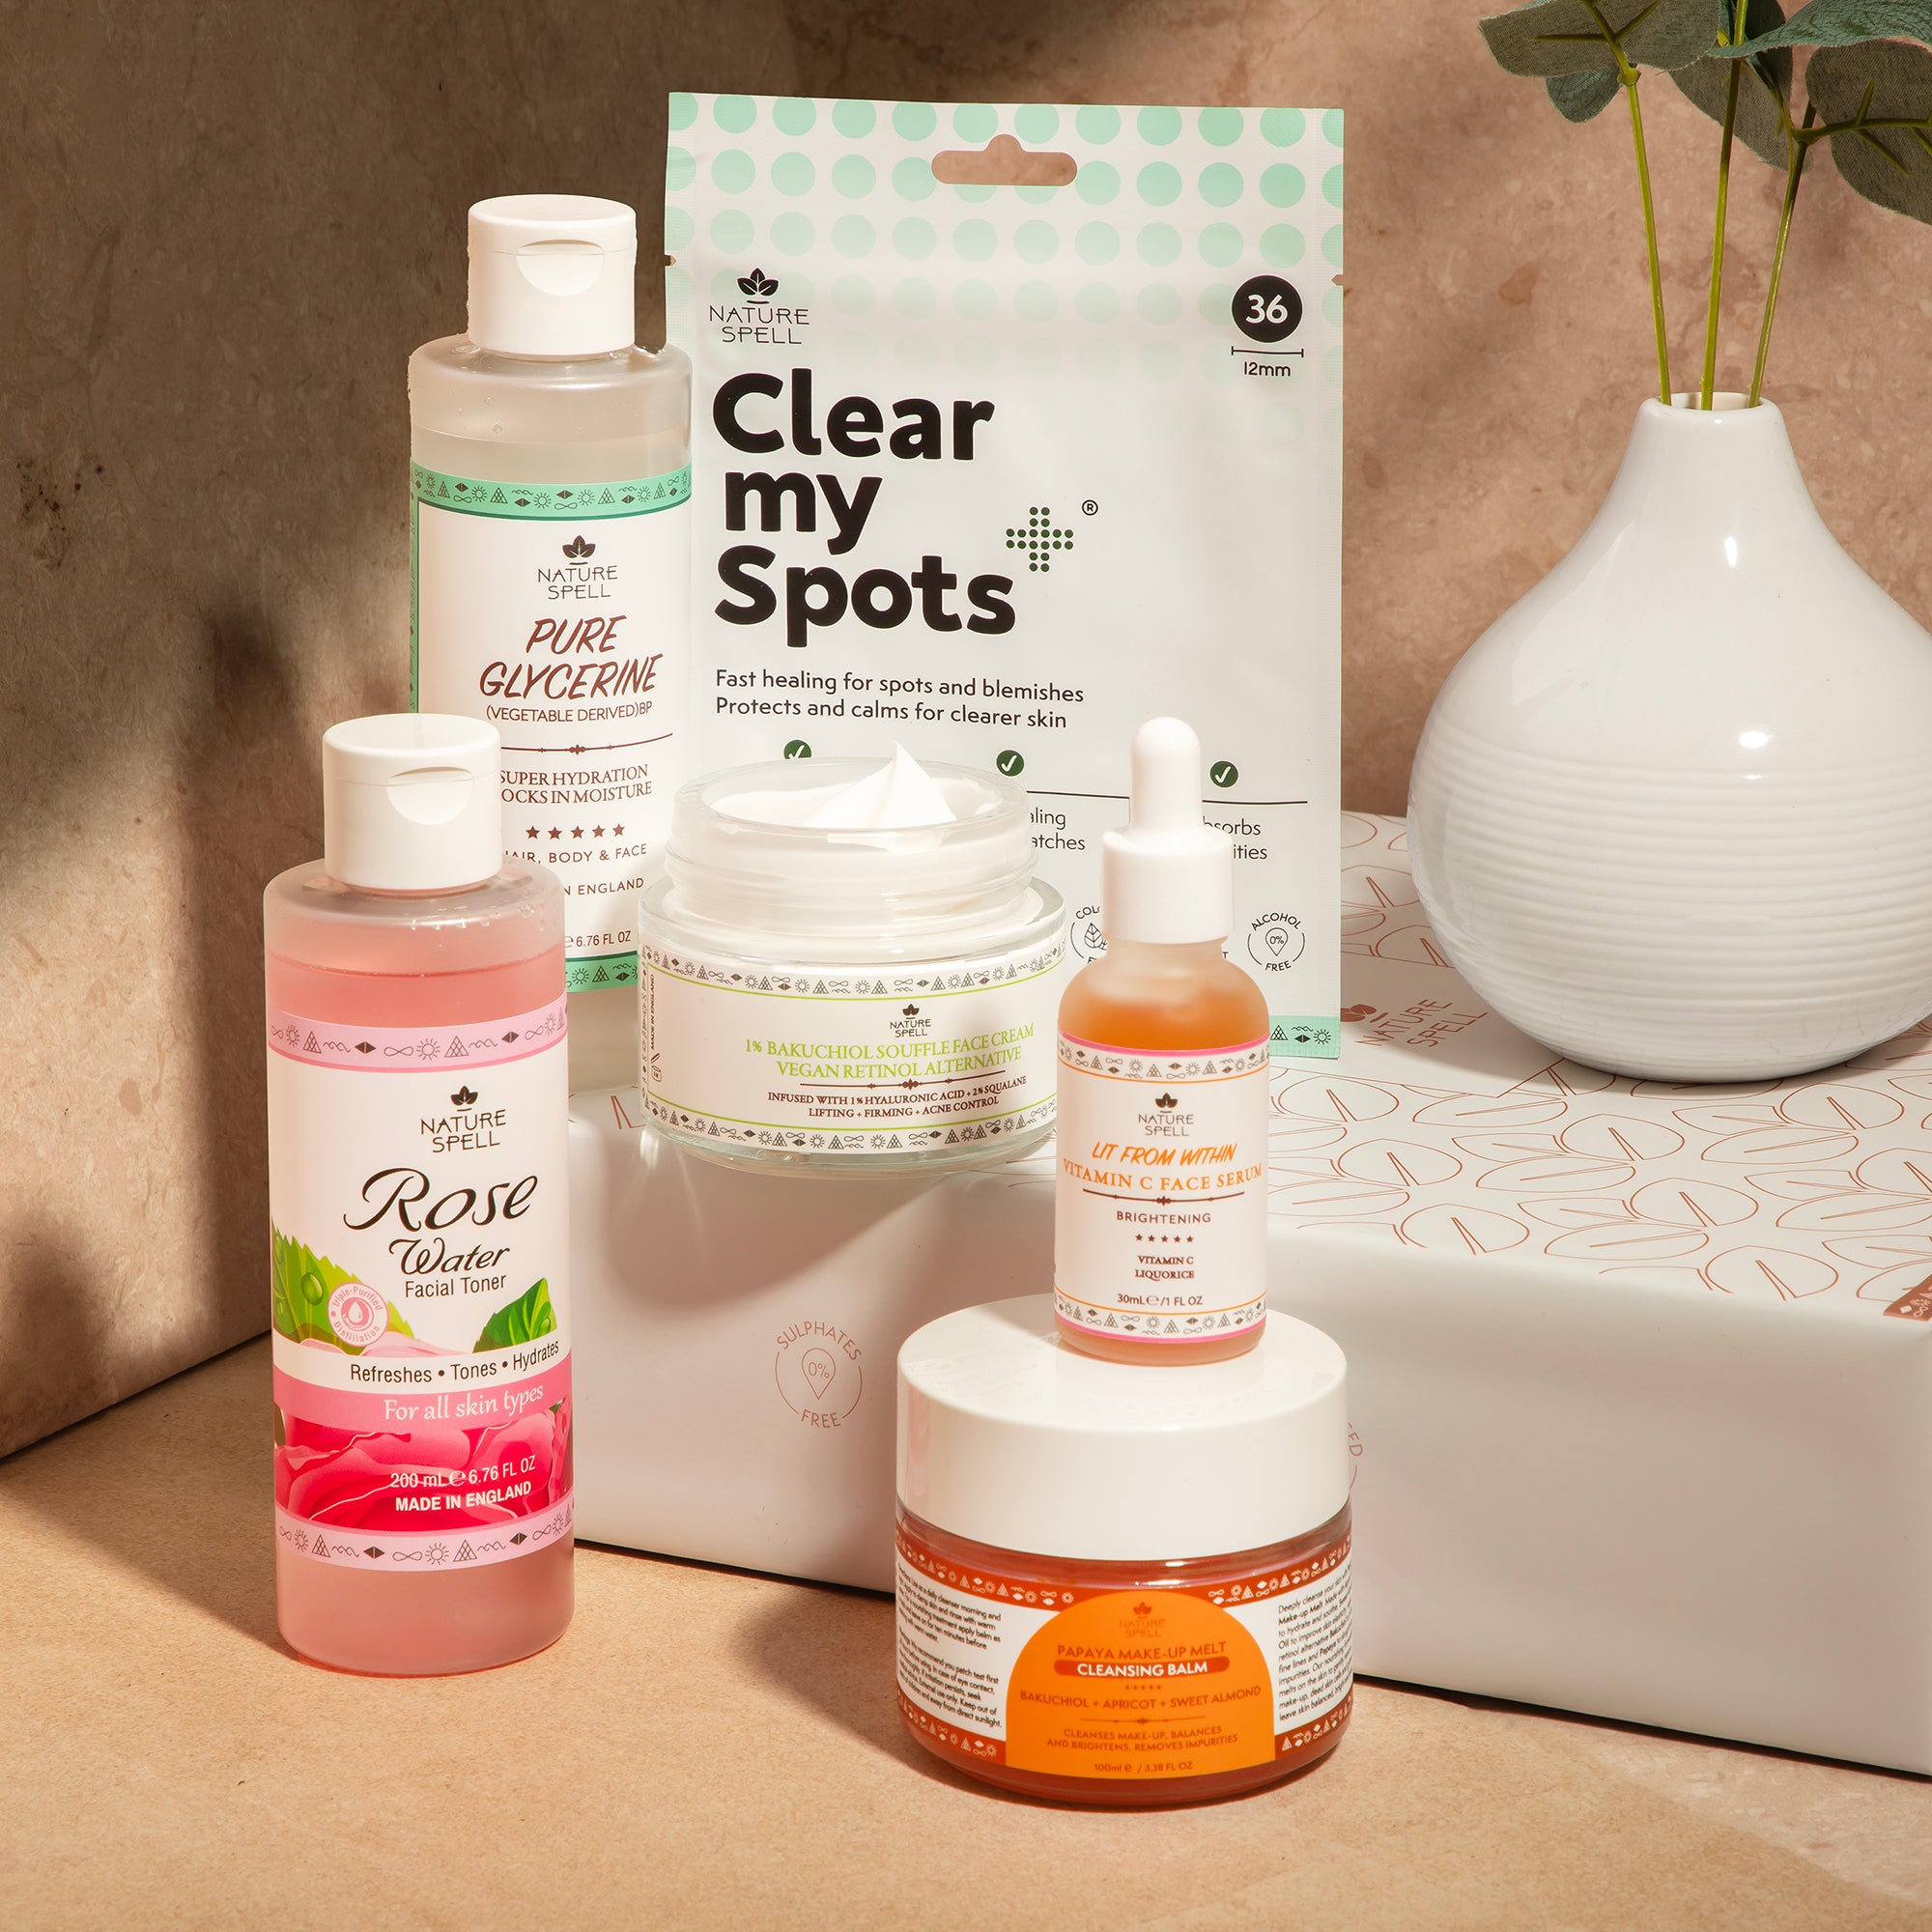 Skincare Saviours Gift Set - Your at-home skin essentials